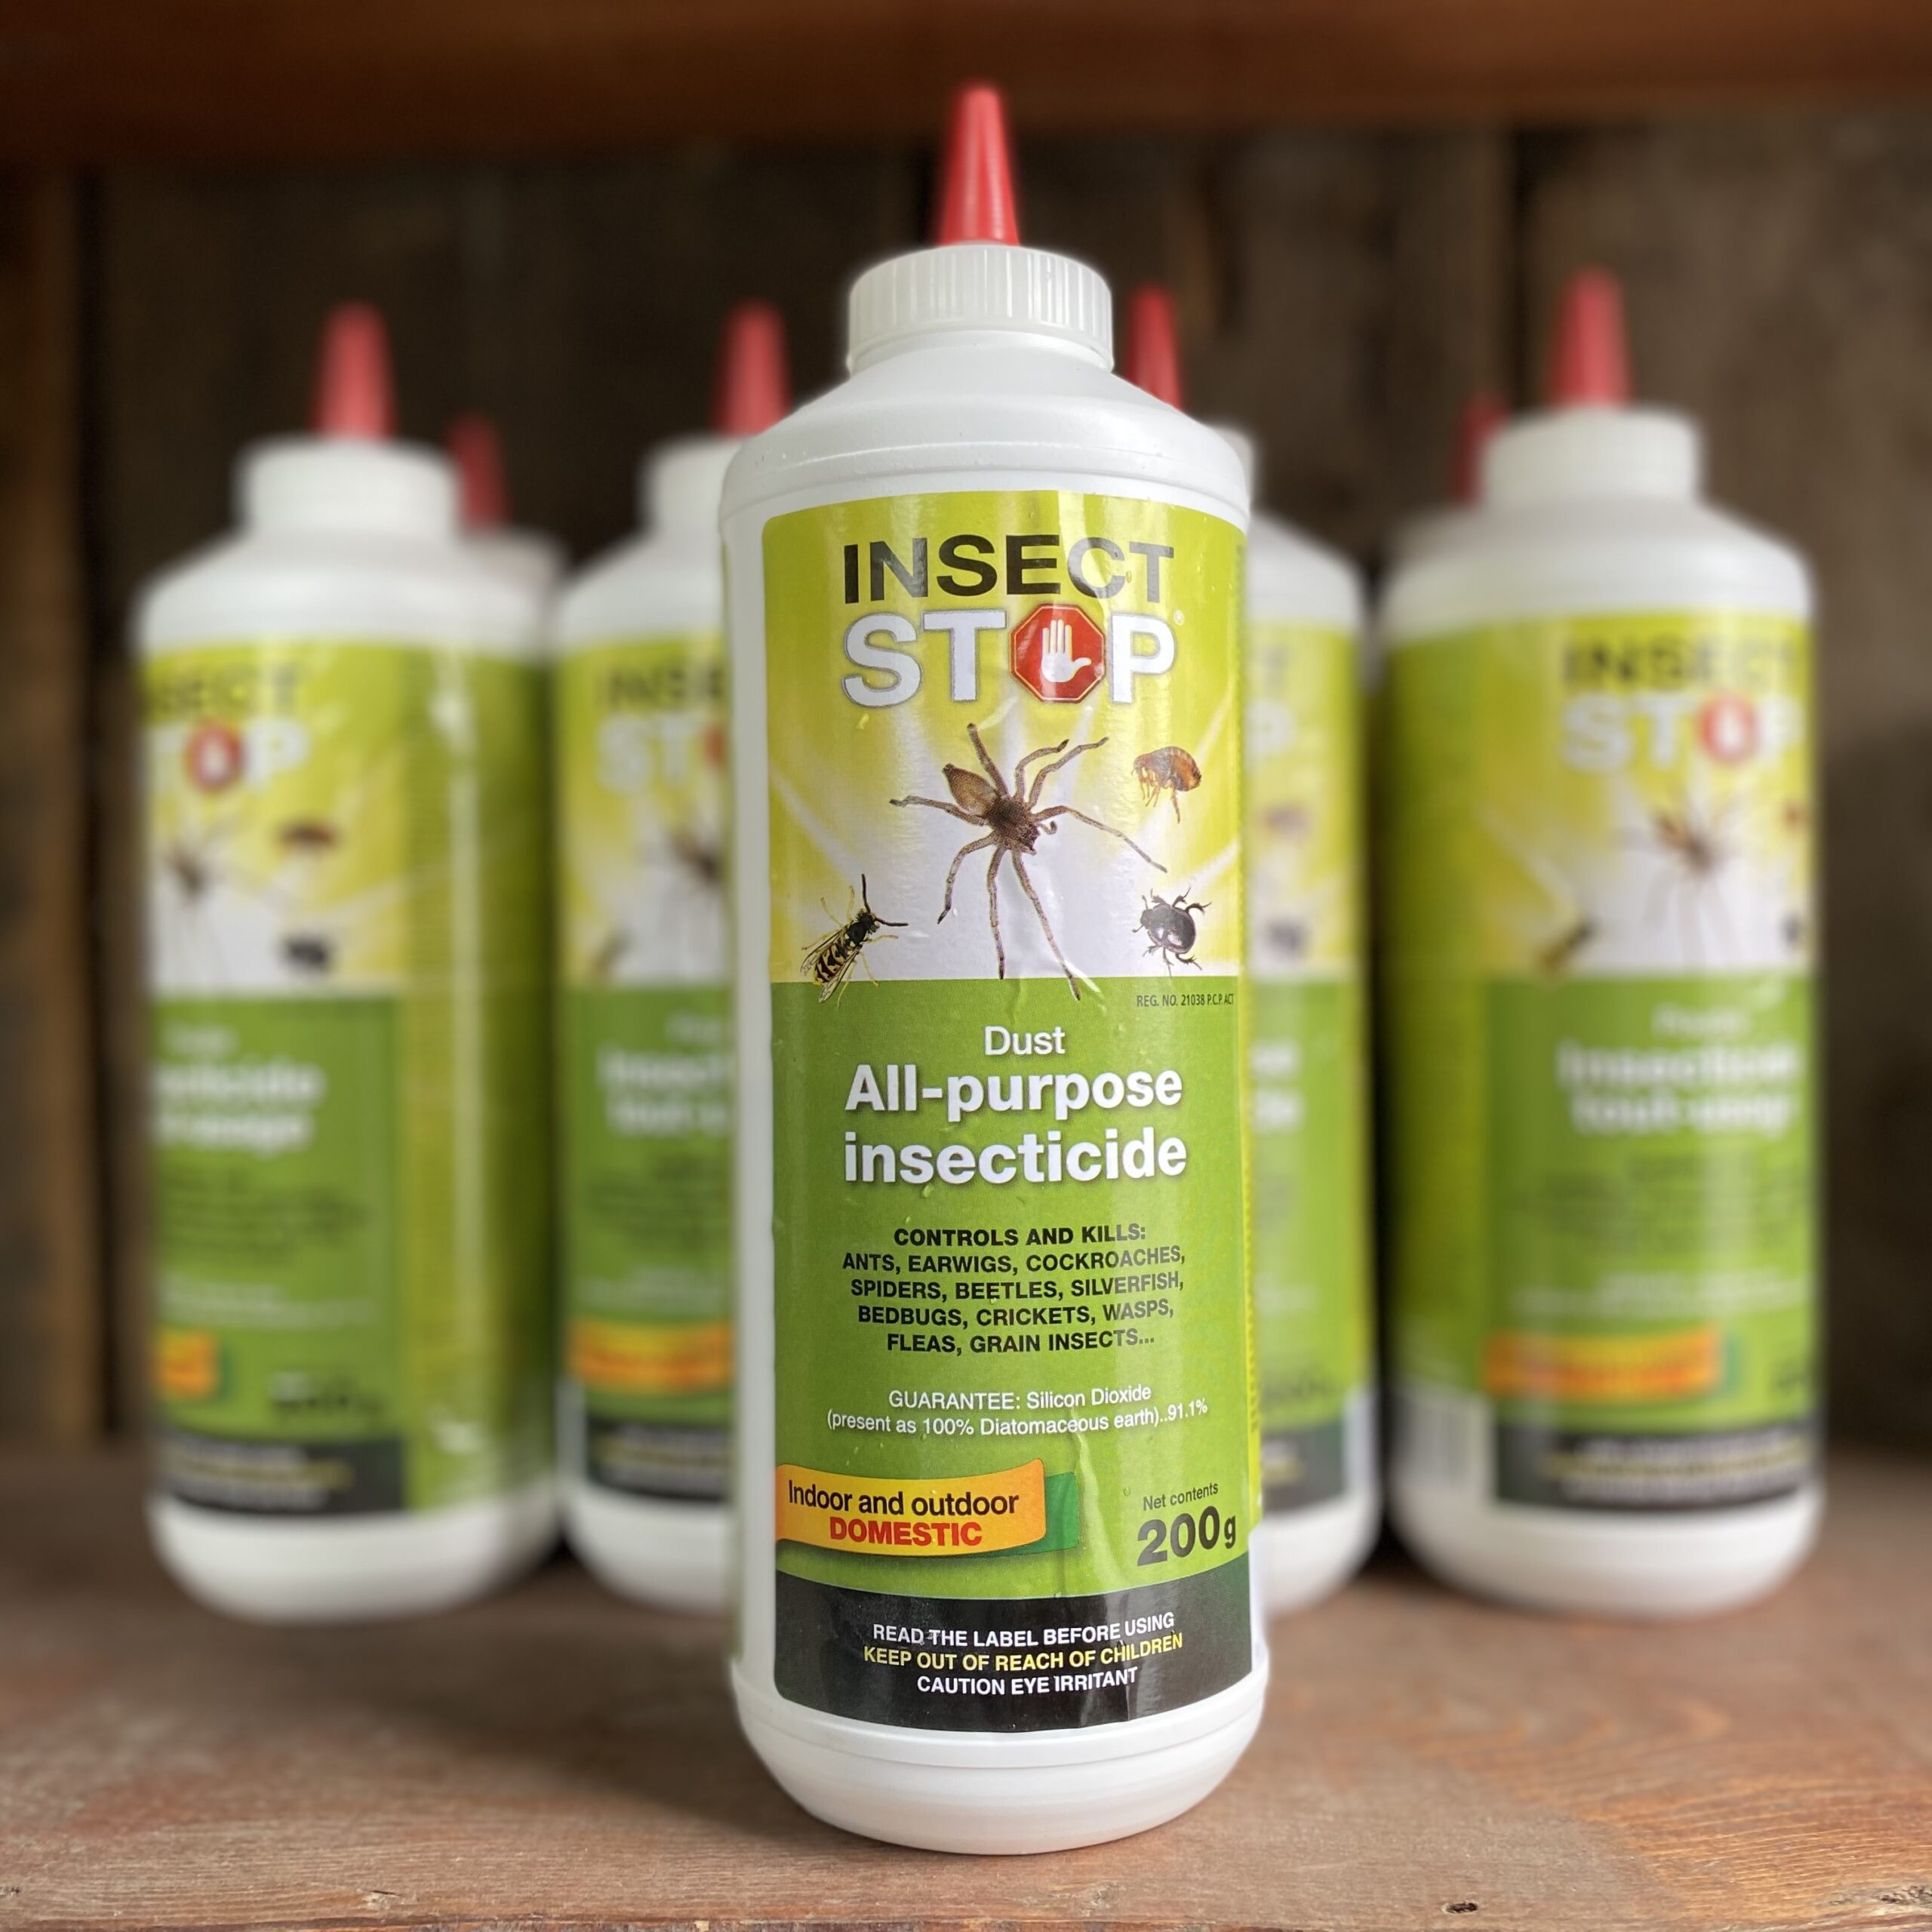 Insect Stop – Insecticide Tout-Usage (200g) – Semis Urbains